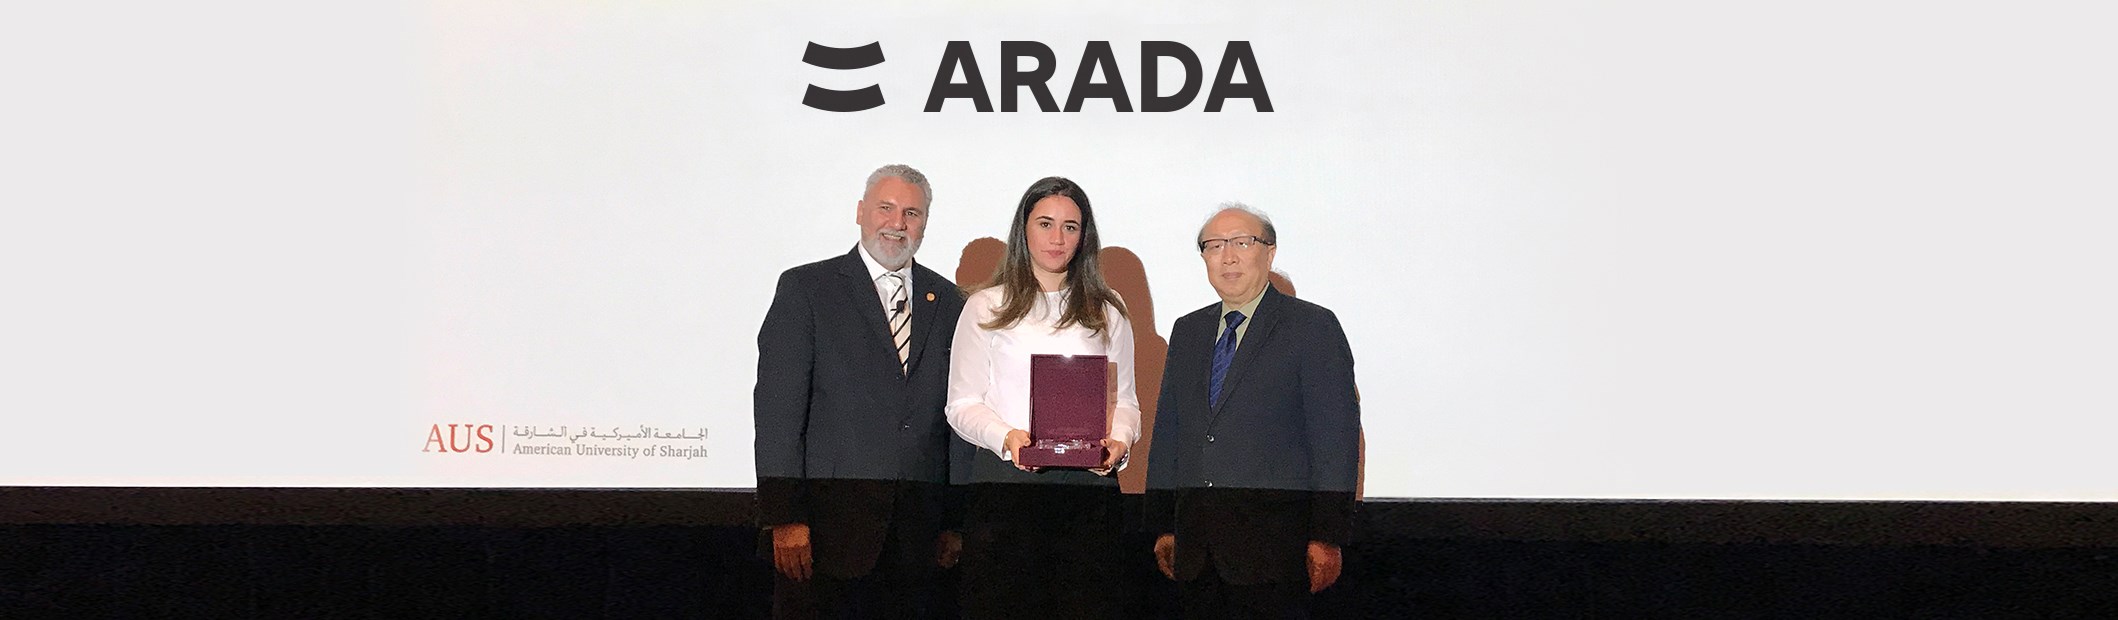 Arada executive named Emerging Young Leader by American University of Sharjah